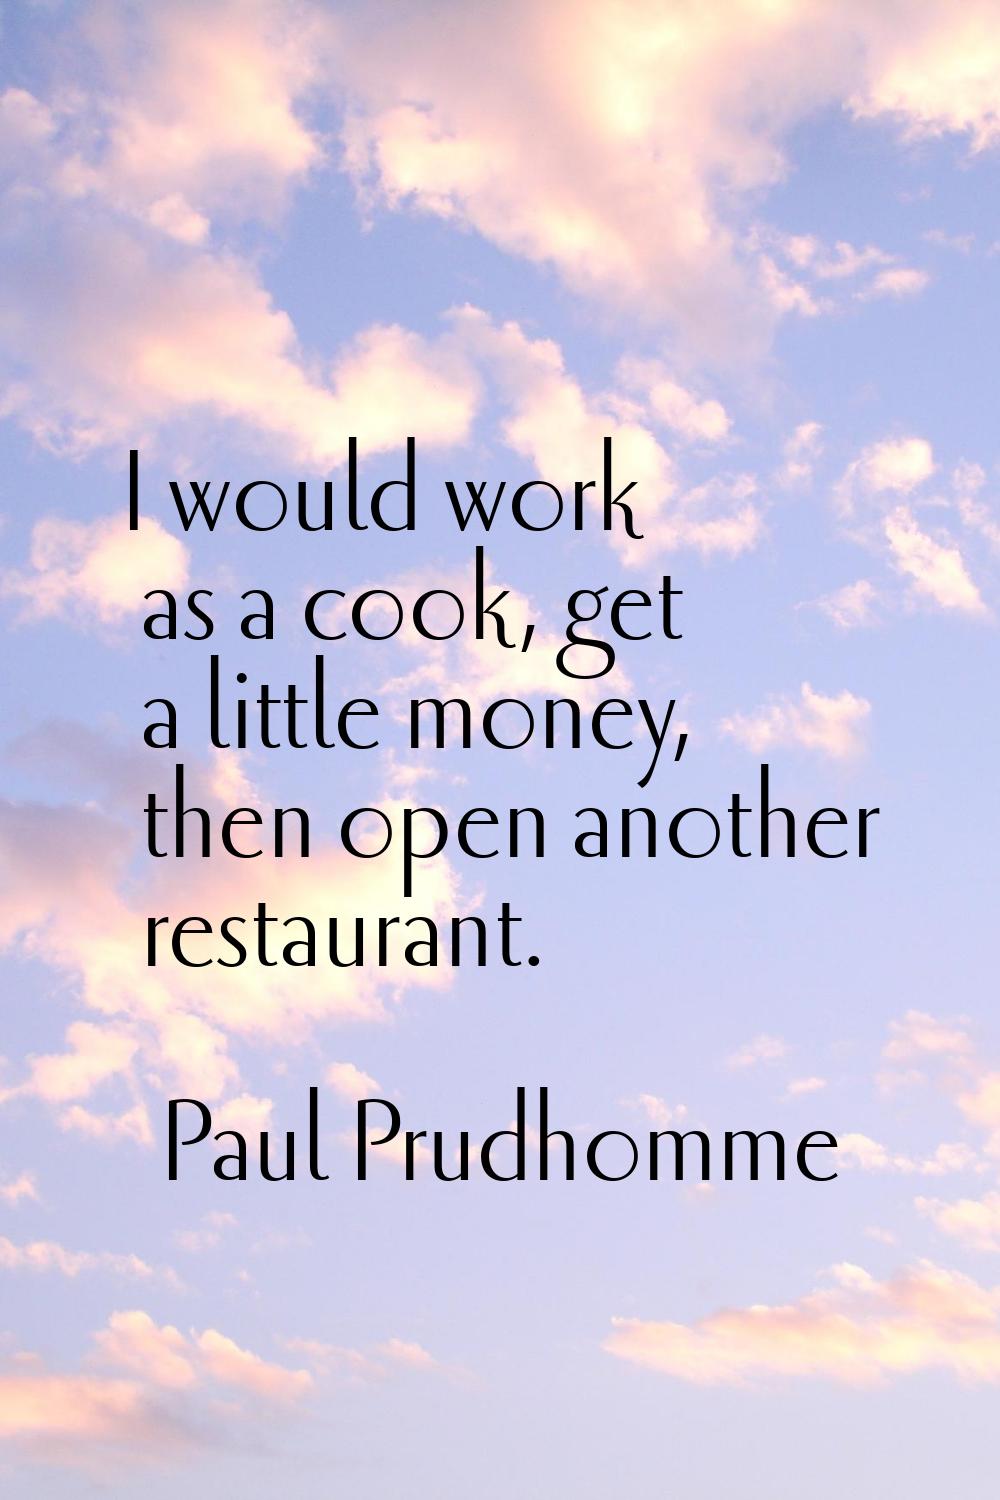 I would work as a cook, get a little money, then open another restaurant.